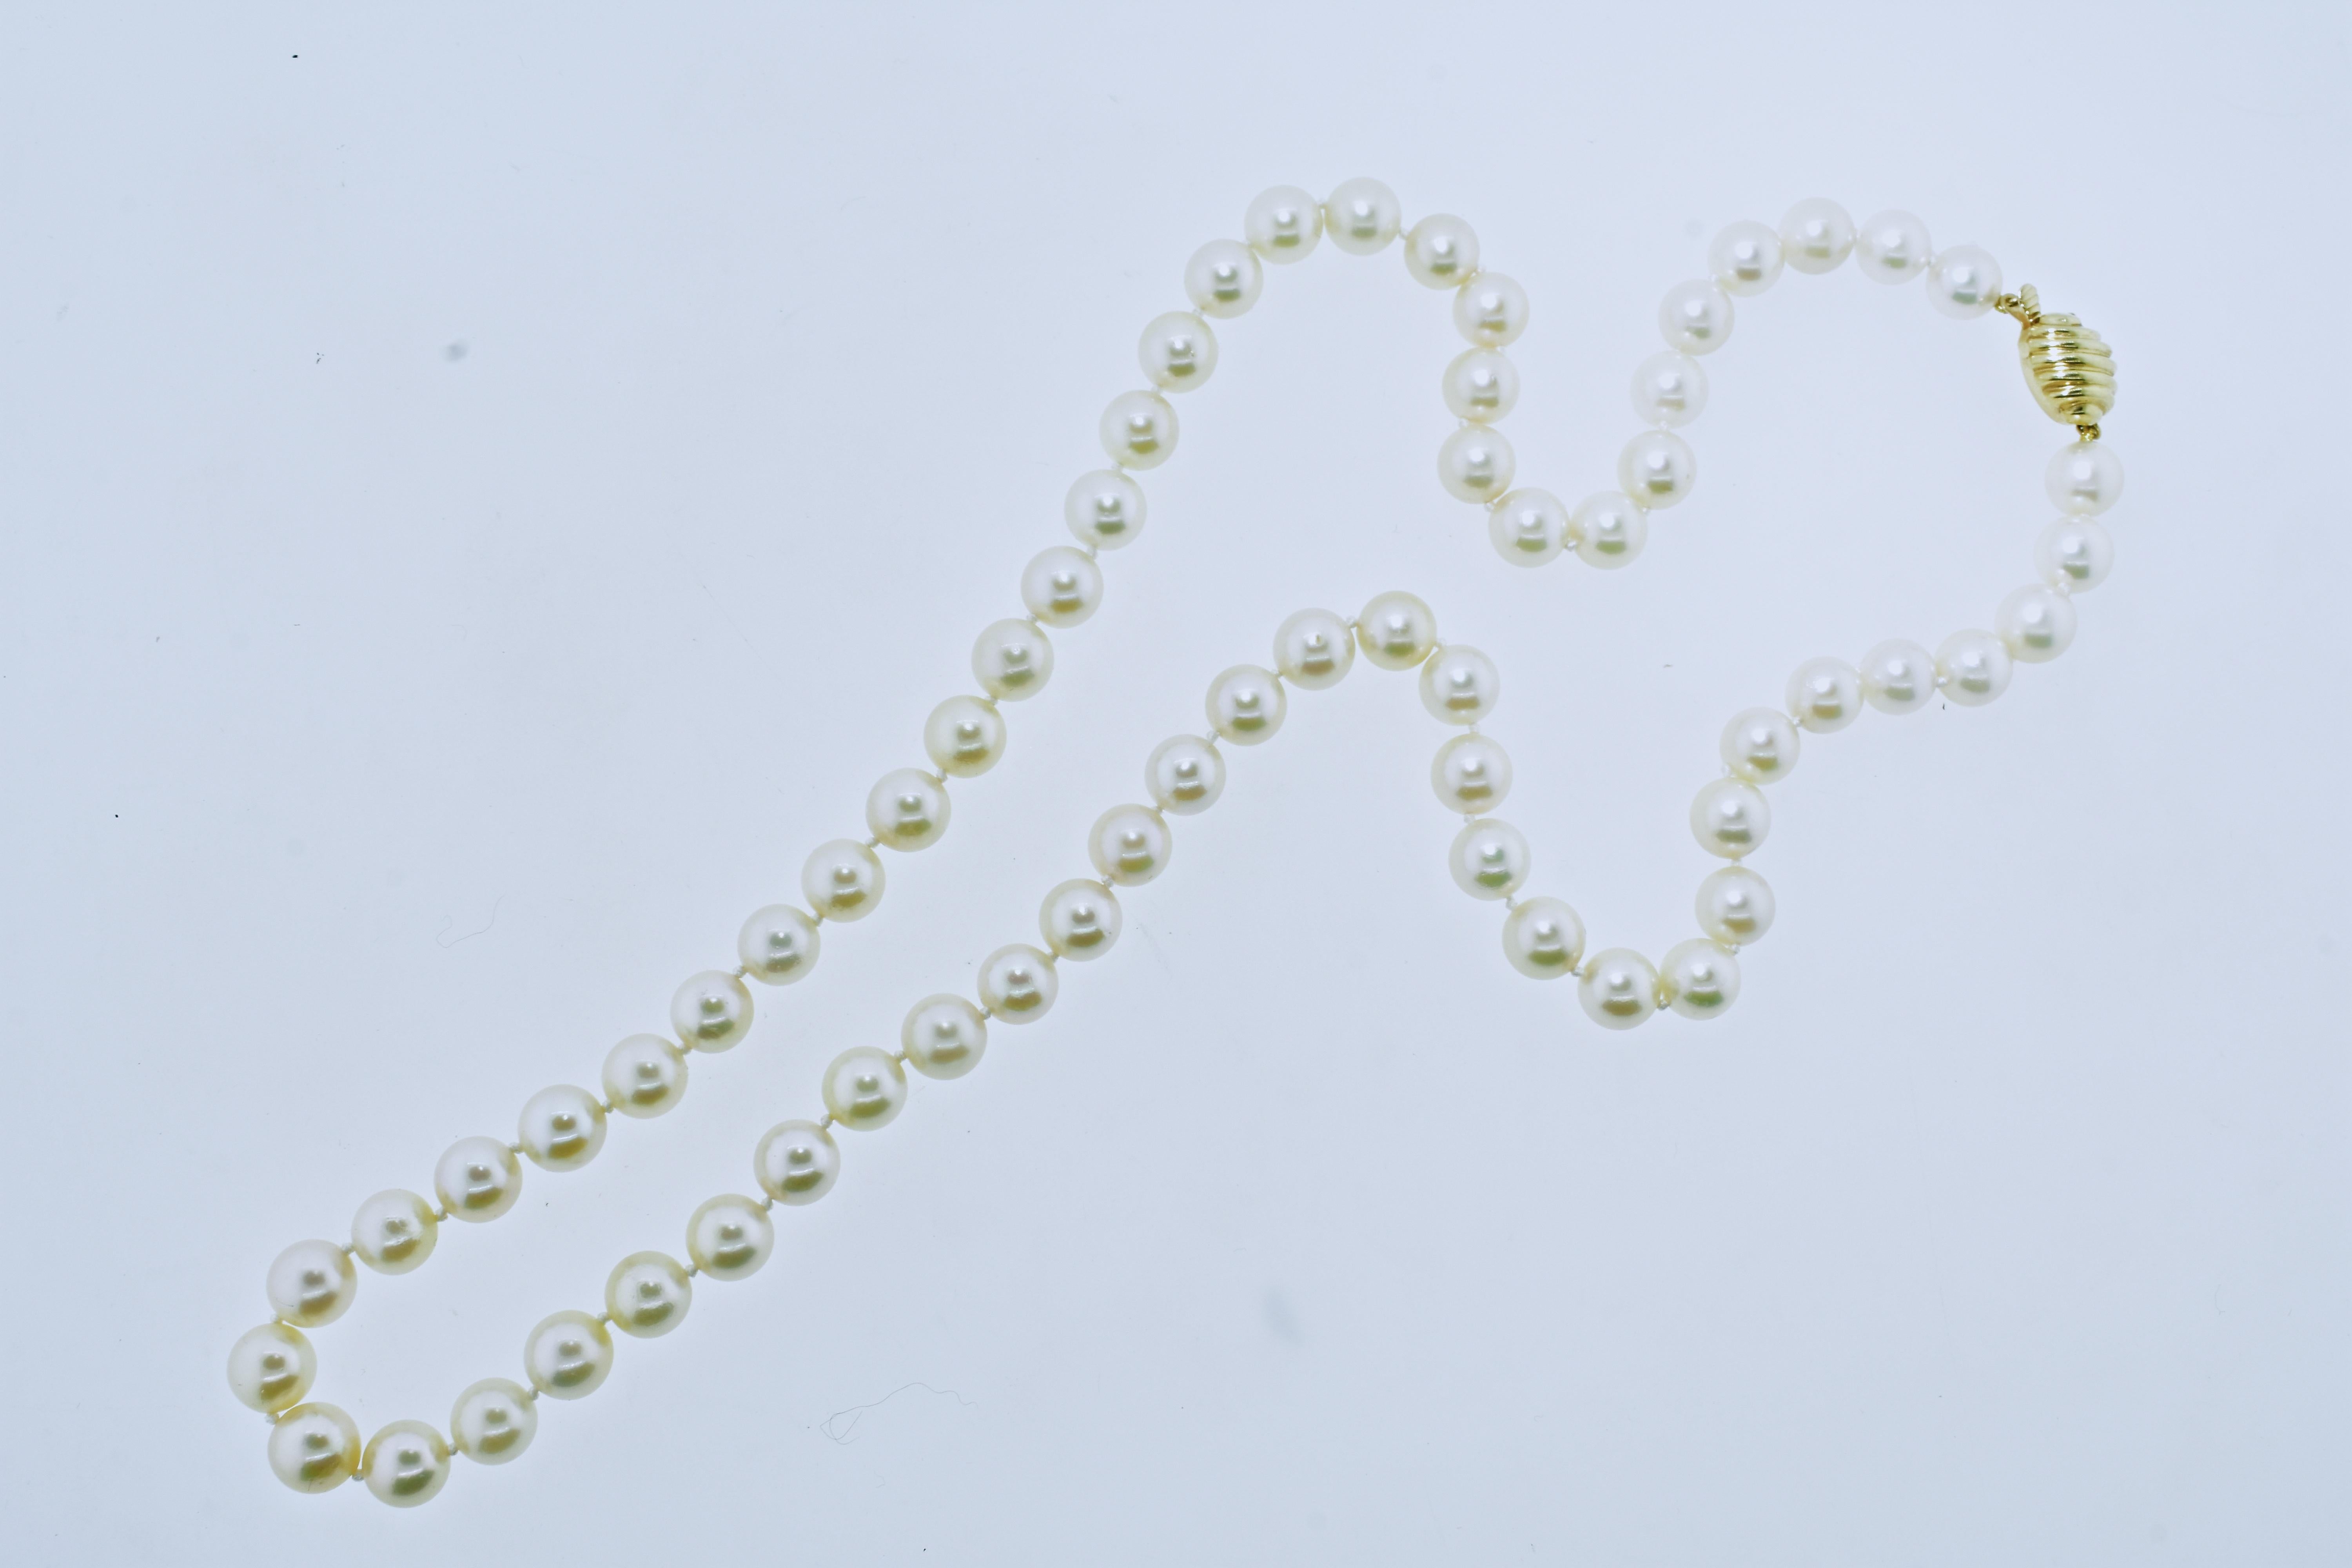 Fine pearls finished with a gold clasp, this strand is 25 inches long and the well matched round white cultured Japanese Akoya pearls range in size from 8.5 mm to 9.0 mm.  This pearls have fine clean skins, are round and deep nacre displaying a